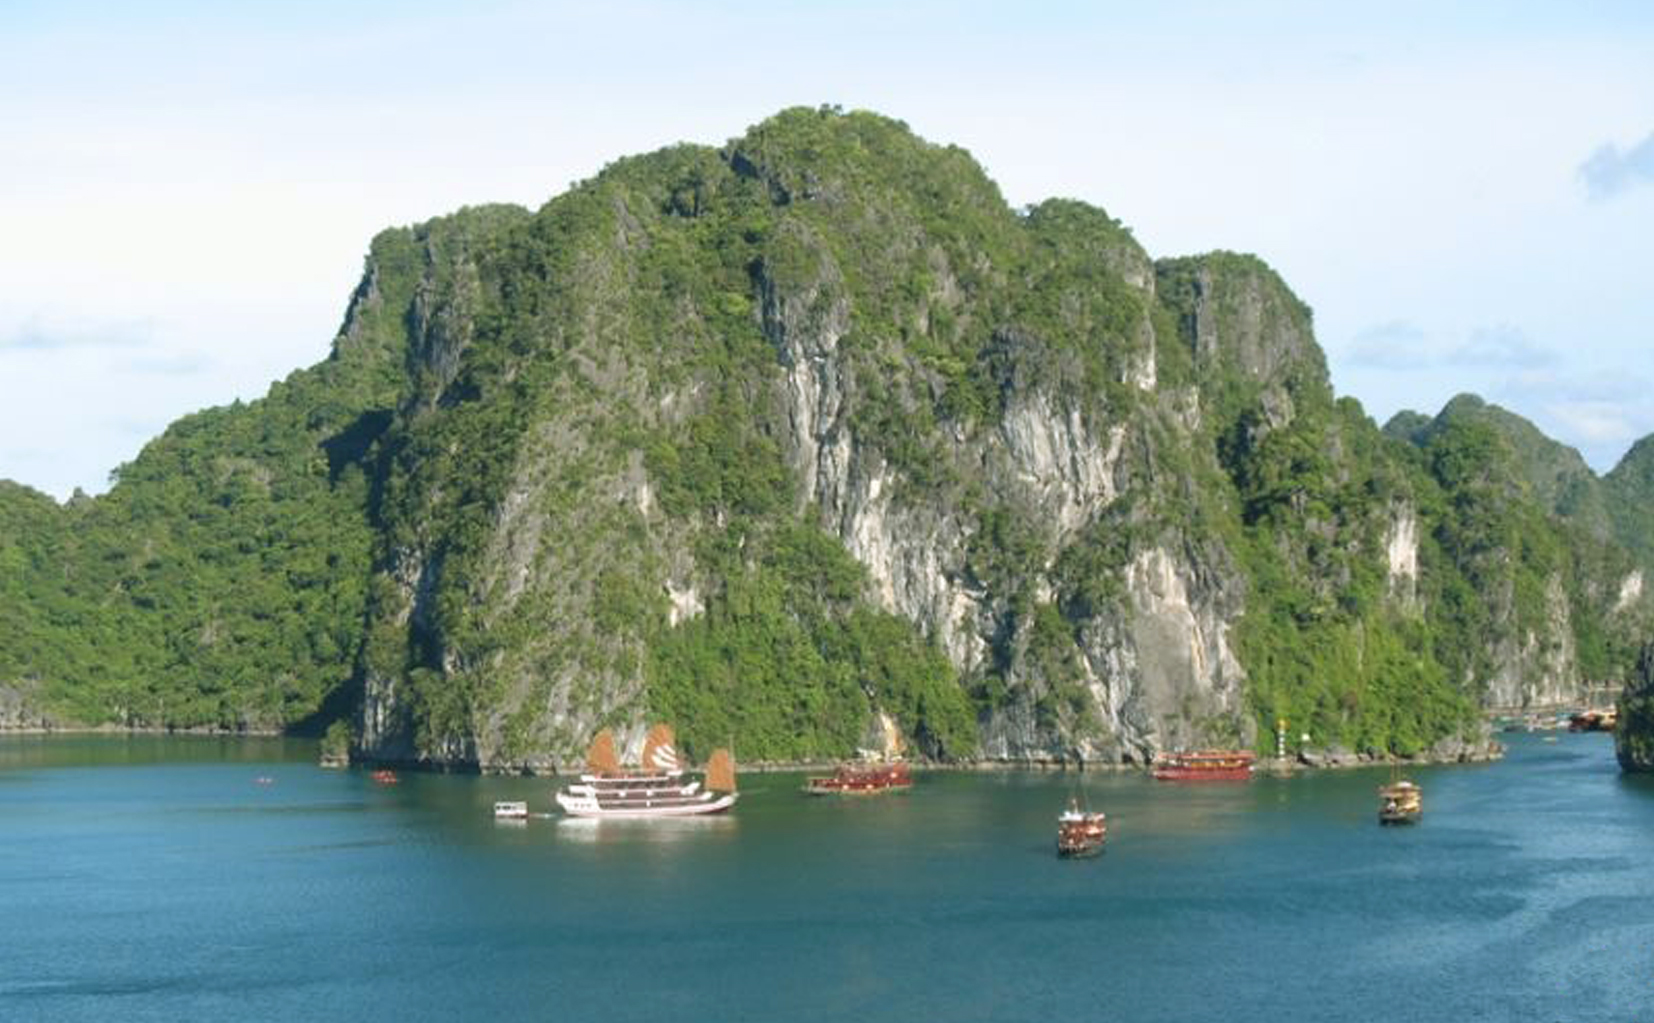 HA LONG BAY - 2 days and 1 night with Dragon Gold cruise (3 star cruise – boat with 11 cabins)